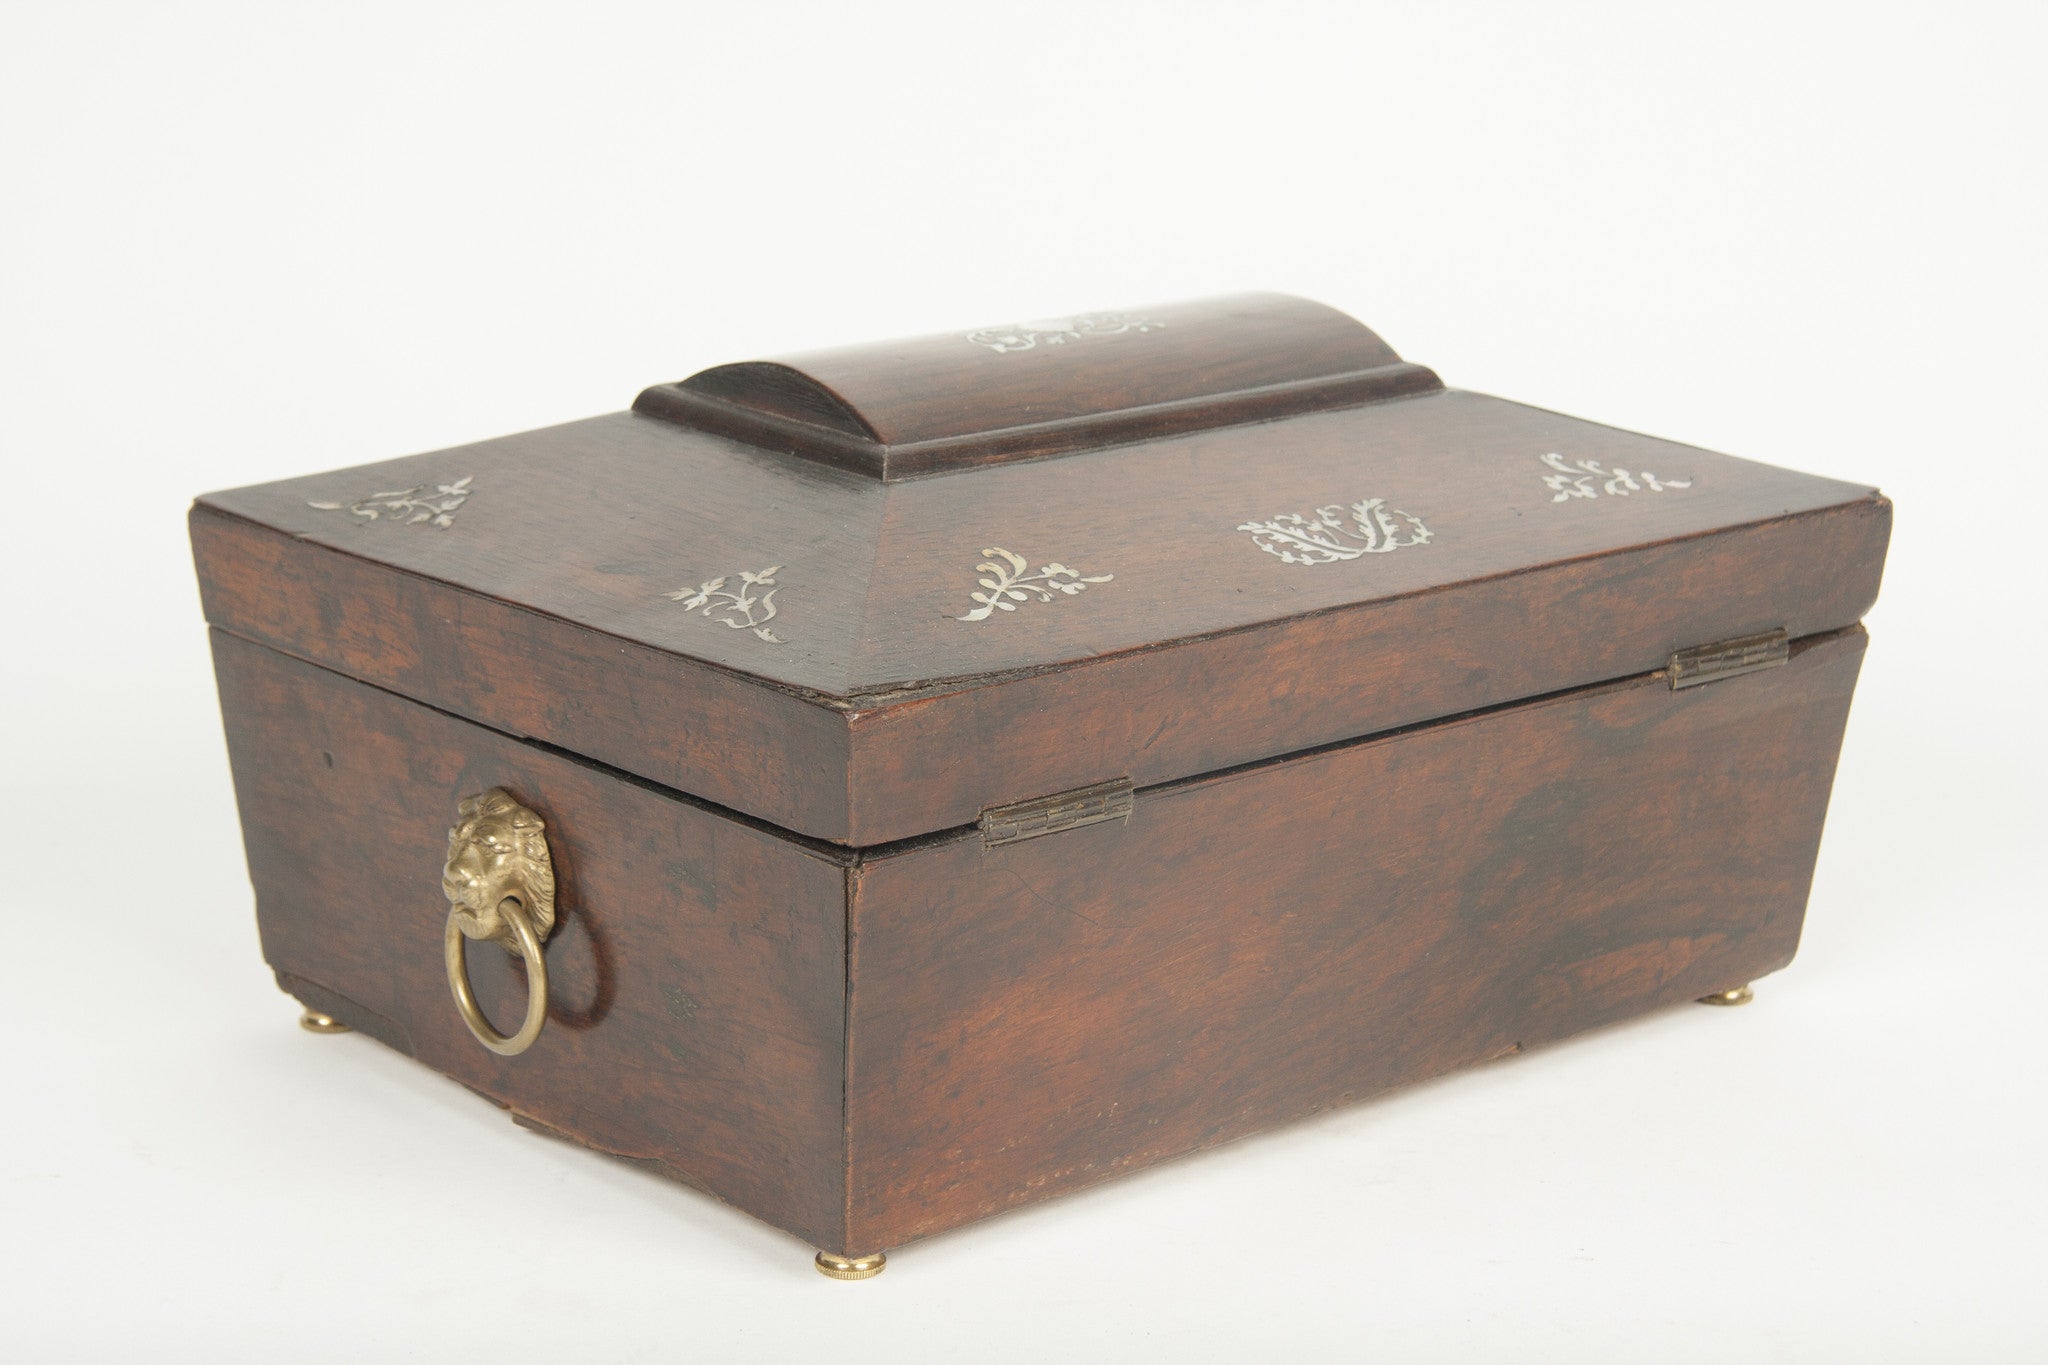 An English Regency Sarcophagus Form Box with Mother of Pearl